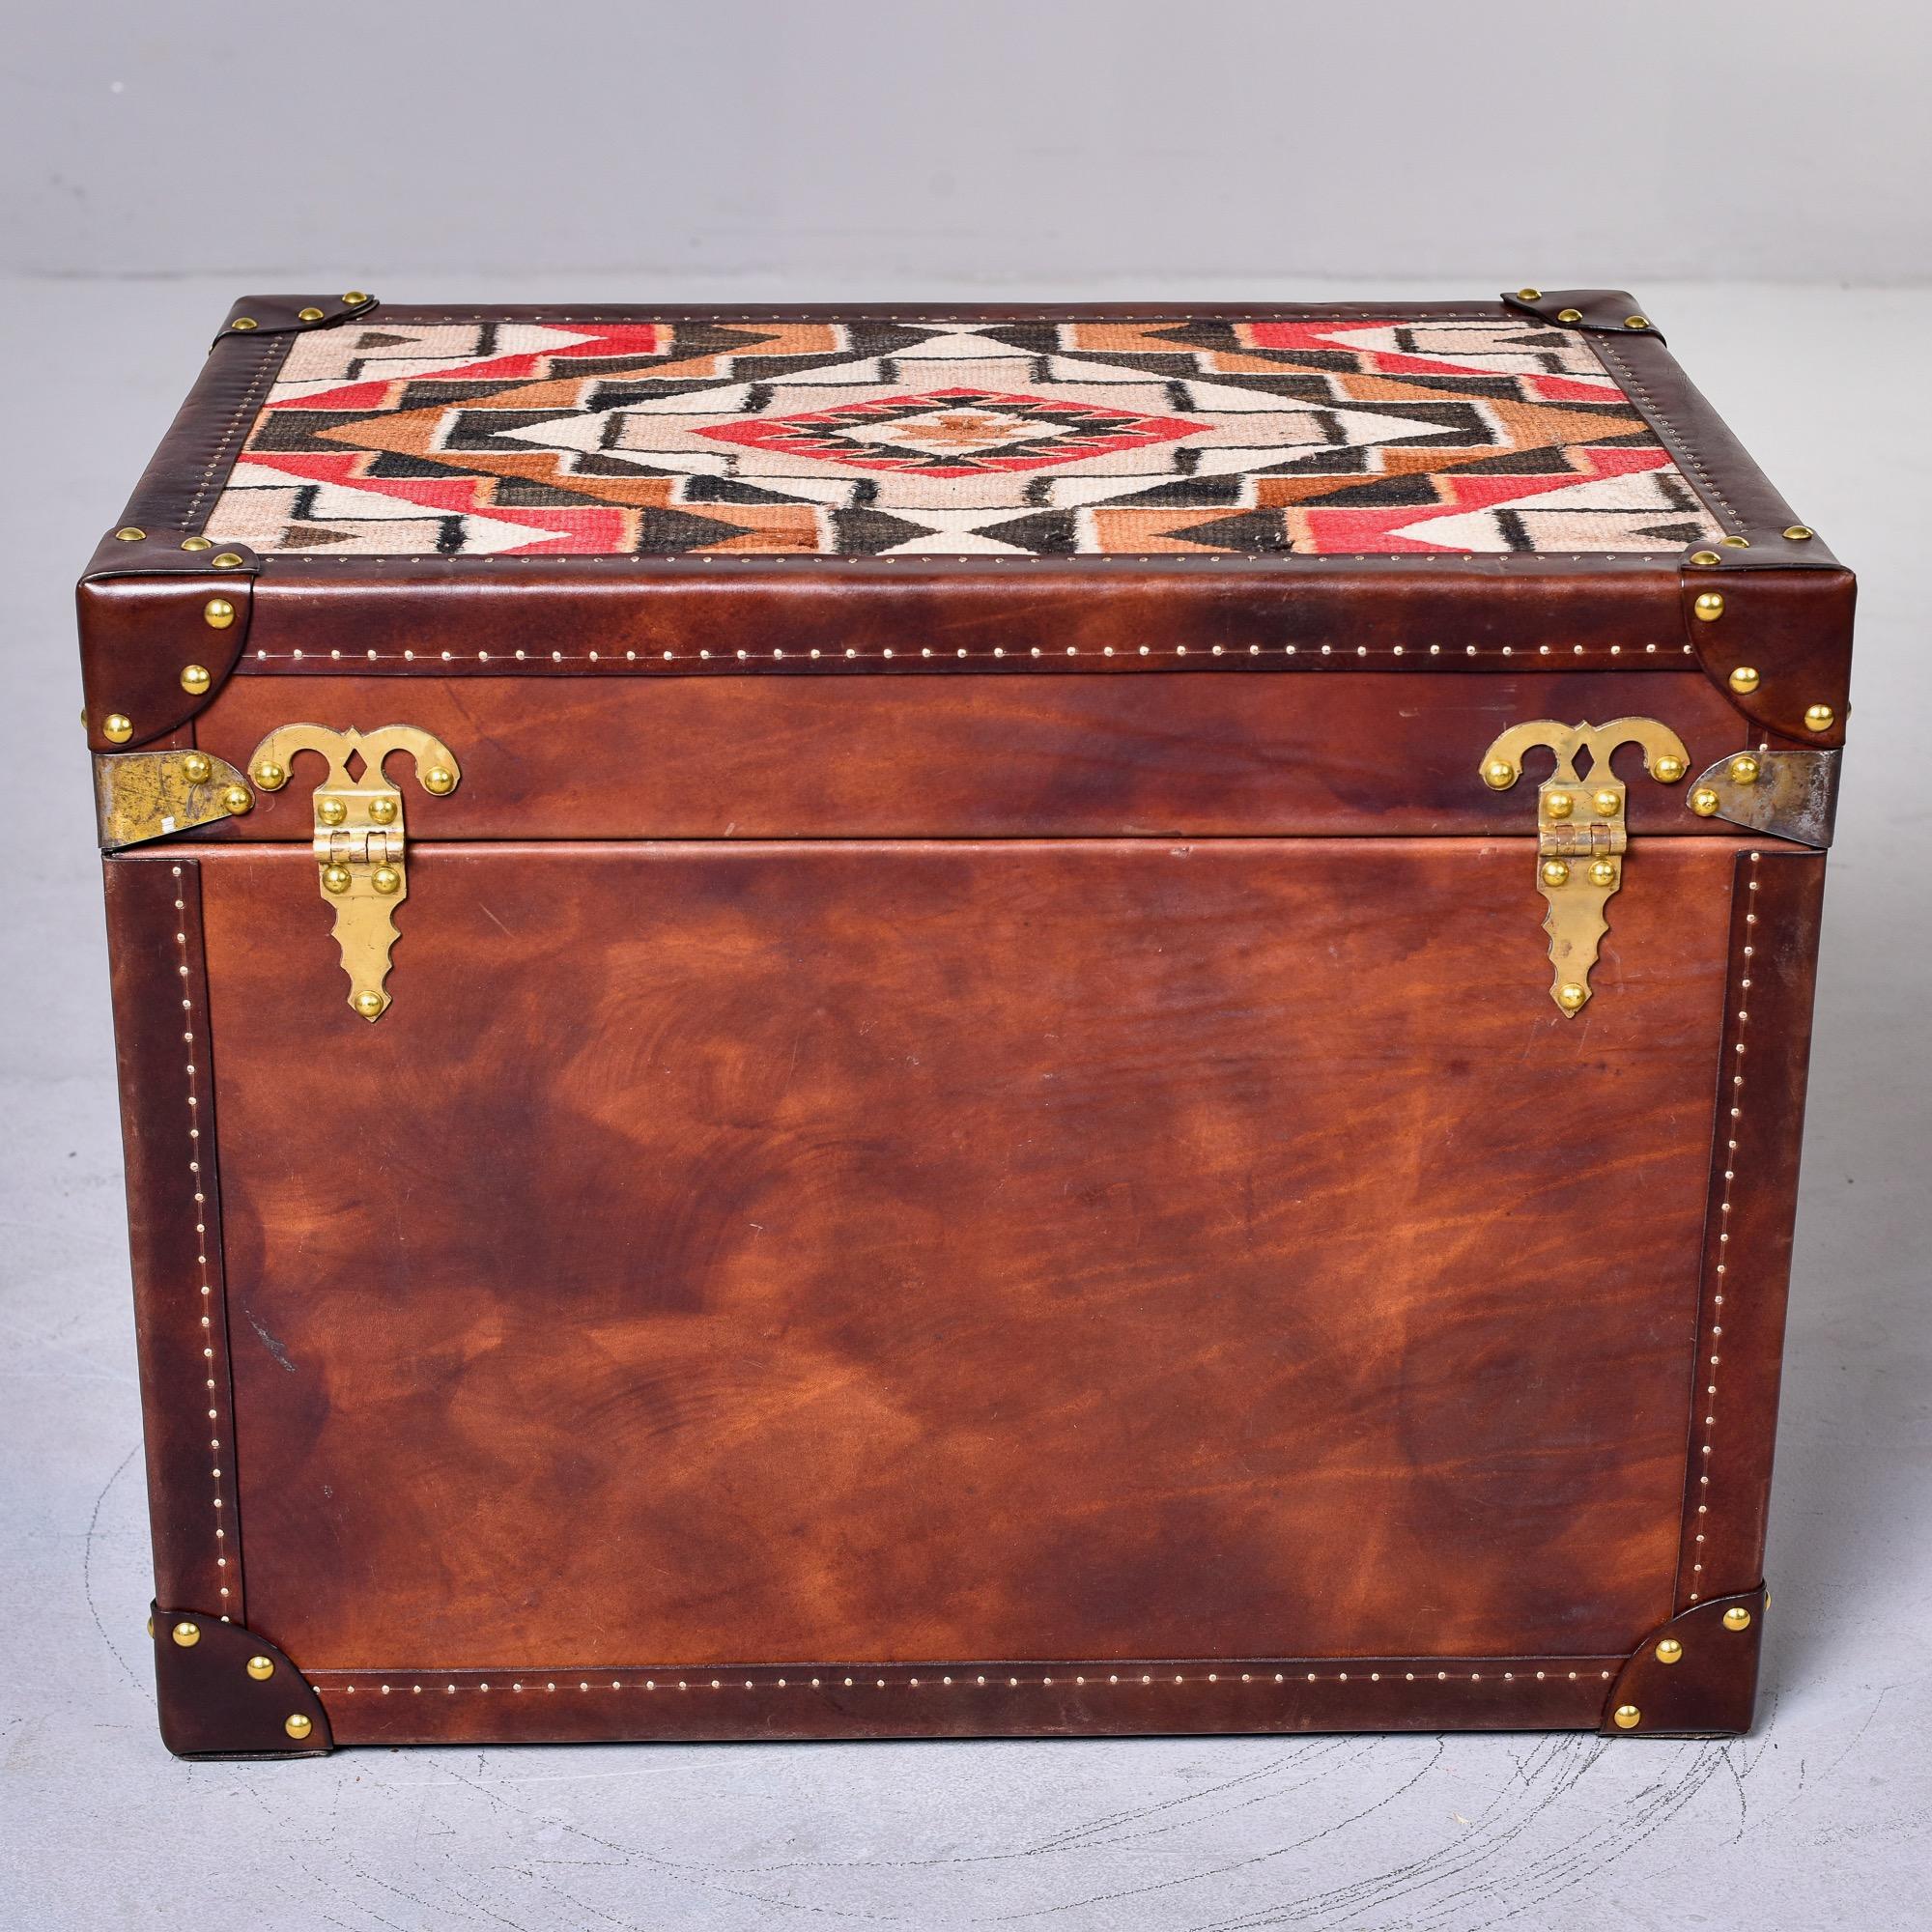 Contemporary Leather Covered Trunk with Vintage Hardware and Kilim on Top Panel For Sale